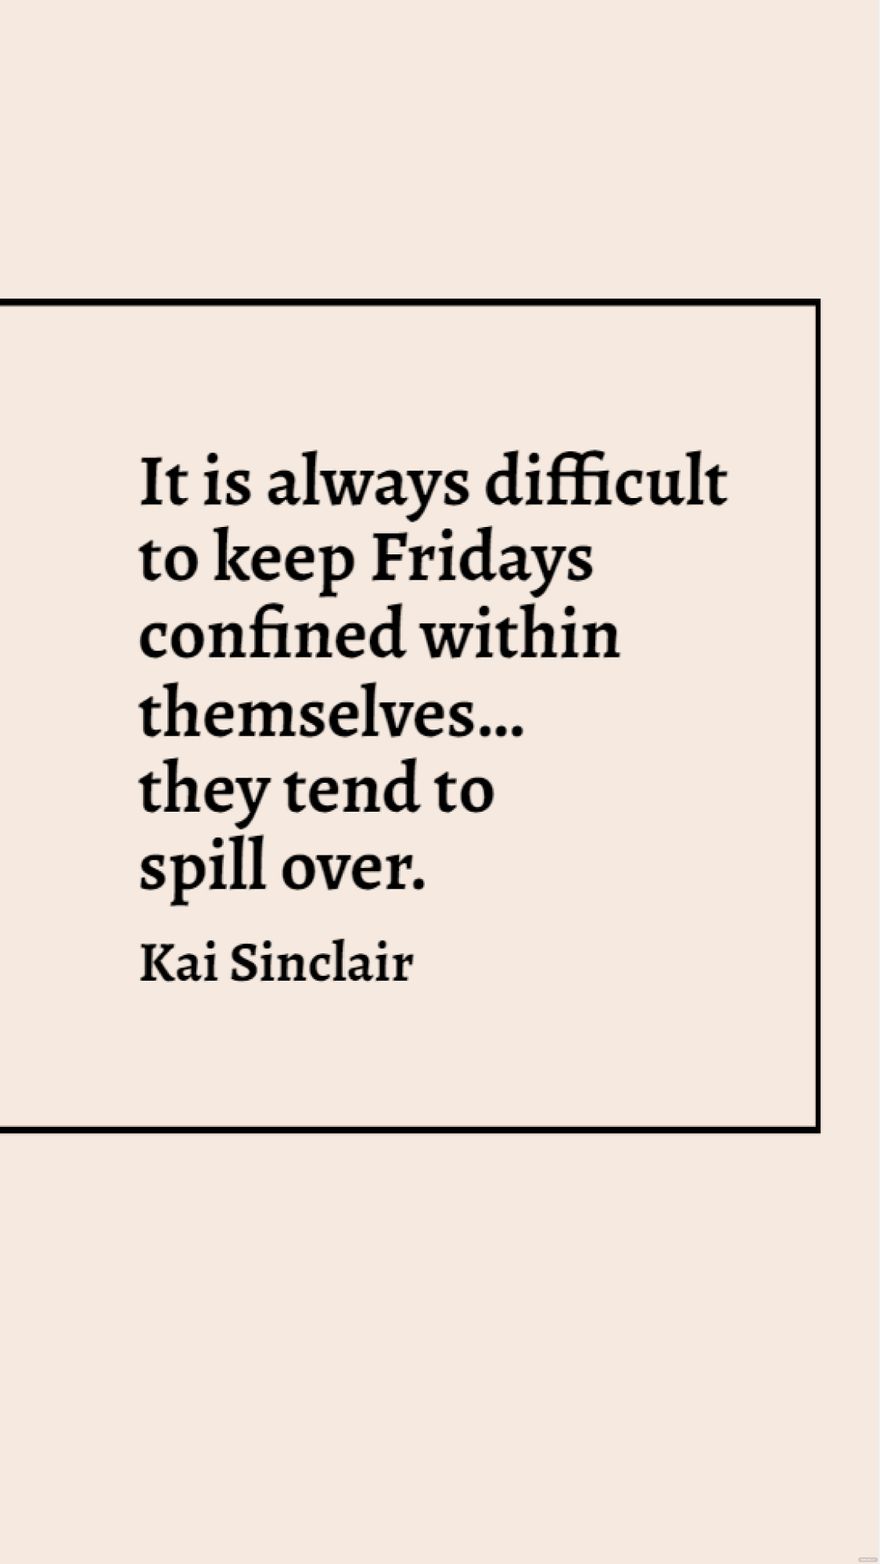 Free Kai Sinclair - It is always difficult to keep Fridays confined within themselves…they tend to spill over. in JPG